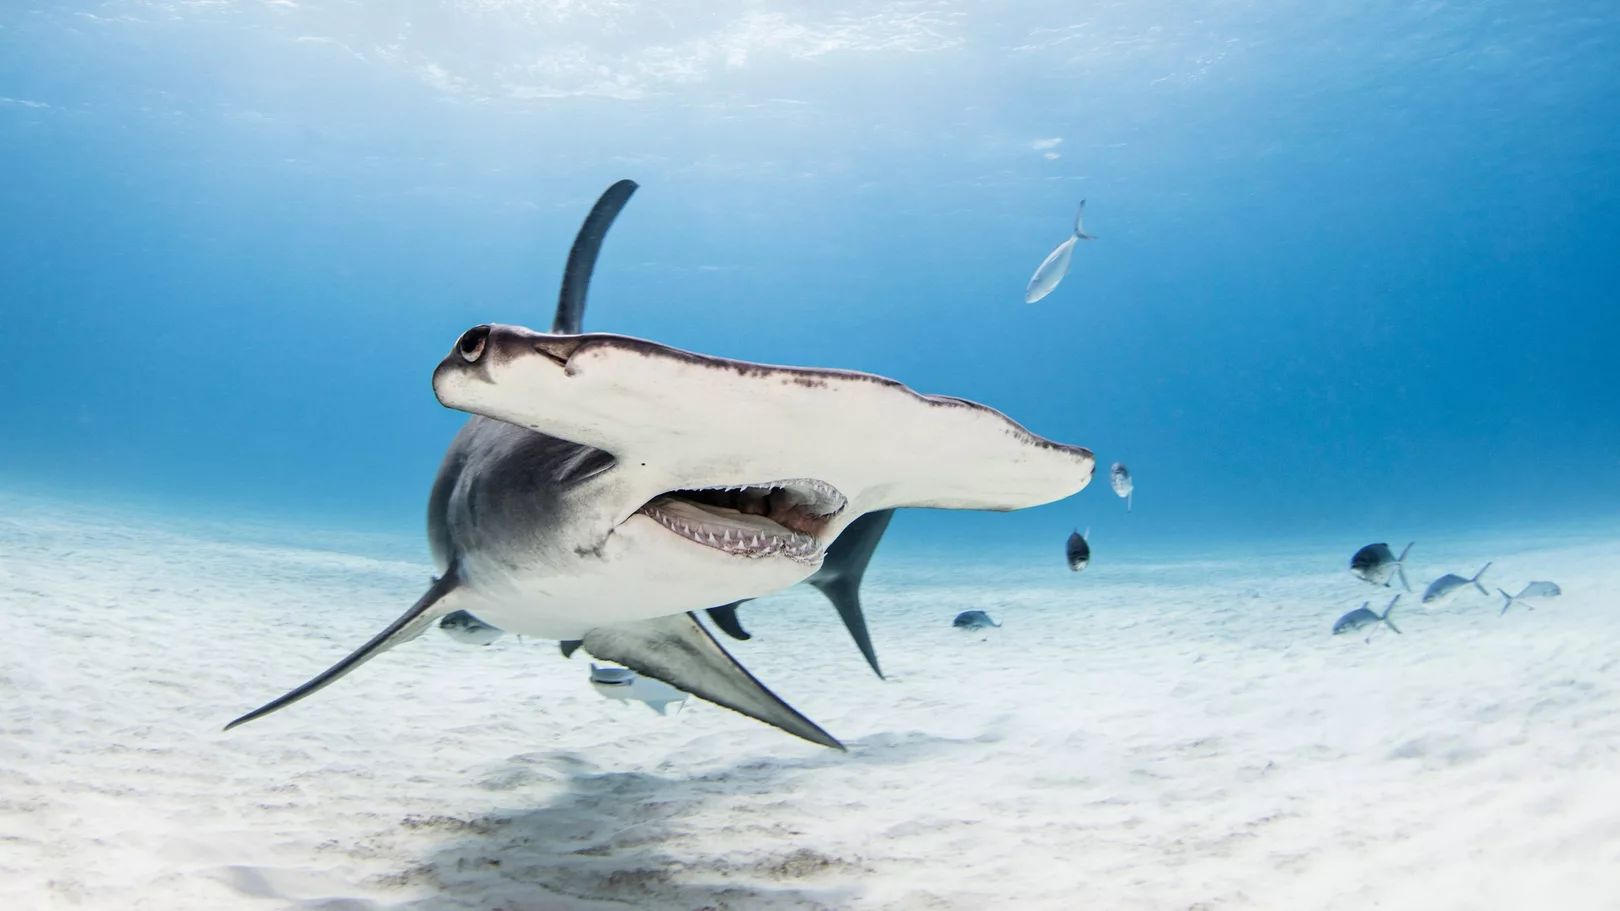 A hammerhead shark swimming over the sandy seabed in Bimini, Bahamas, one of the best places to dive with hammerhead sharks